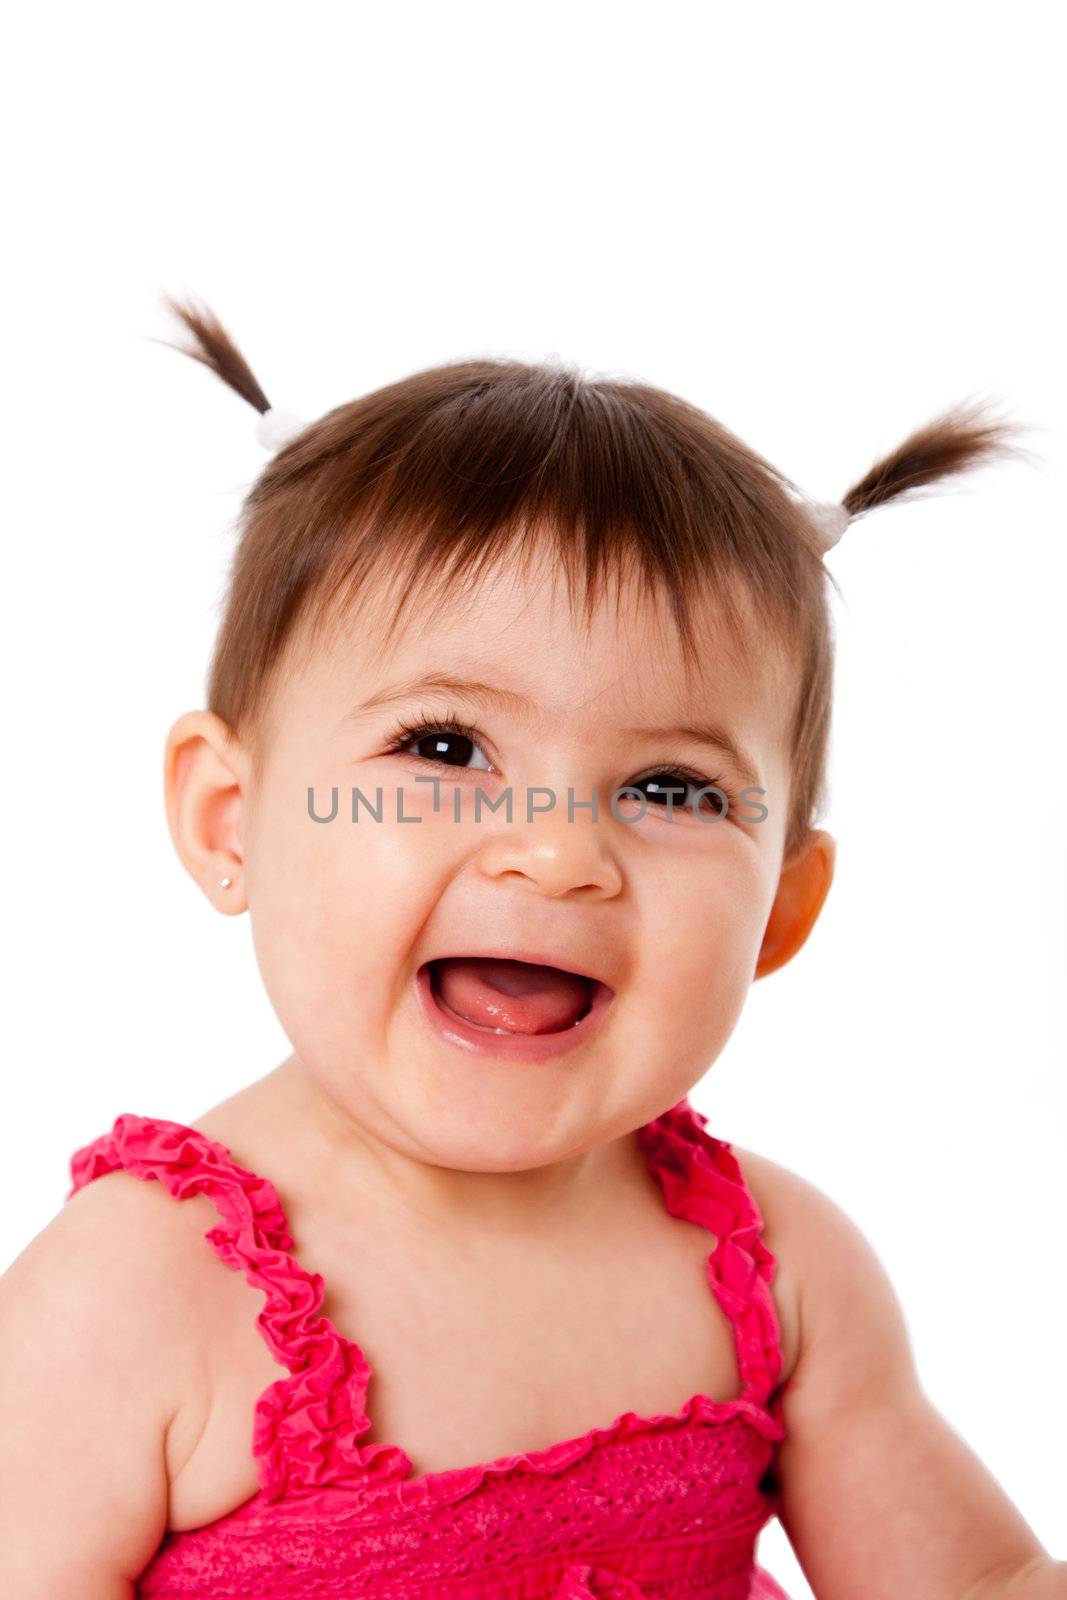 Face of cute happy smiling laughing baby infant girl with ponytails, isolated.